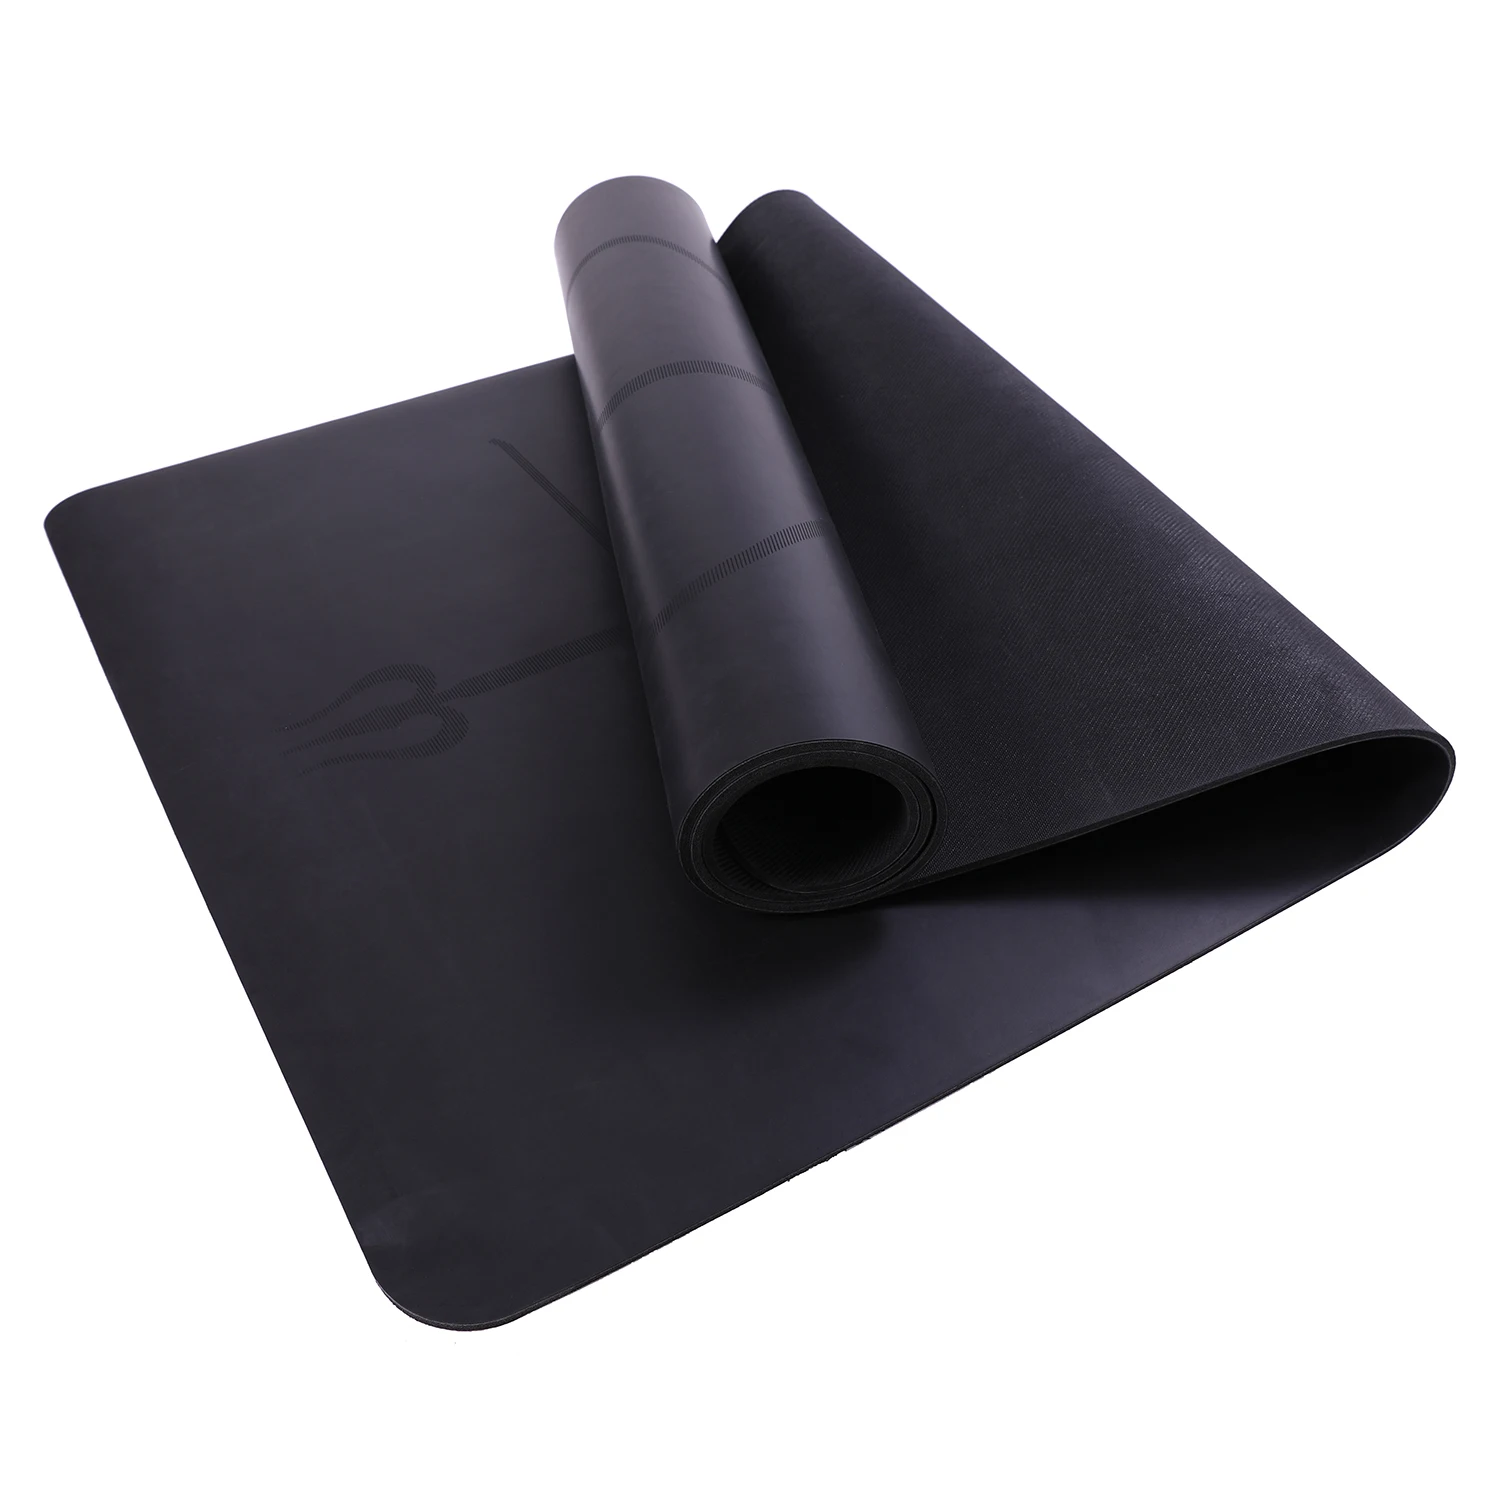 

5m x 1m x 20cm Thick Inflatable Air Track Gymnastics Tumbling Airtrack Mat With Pump